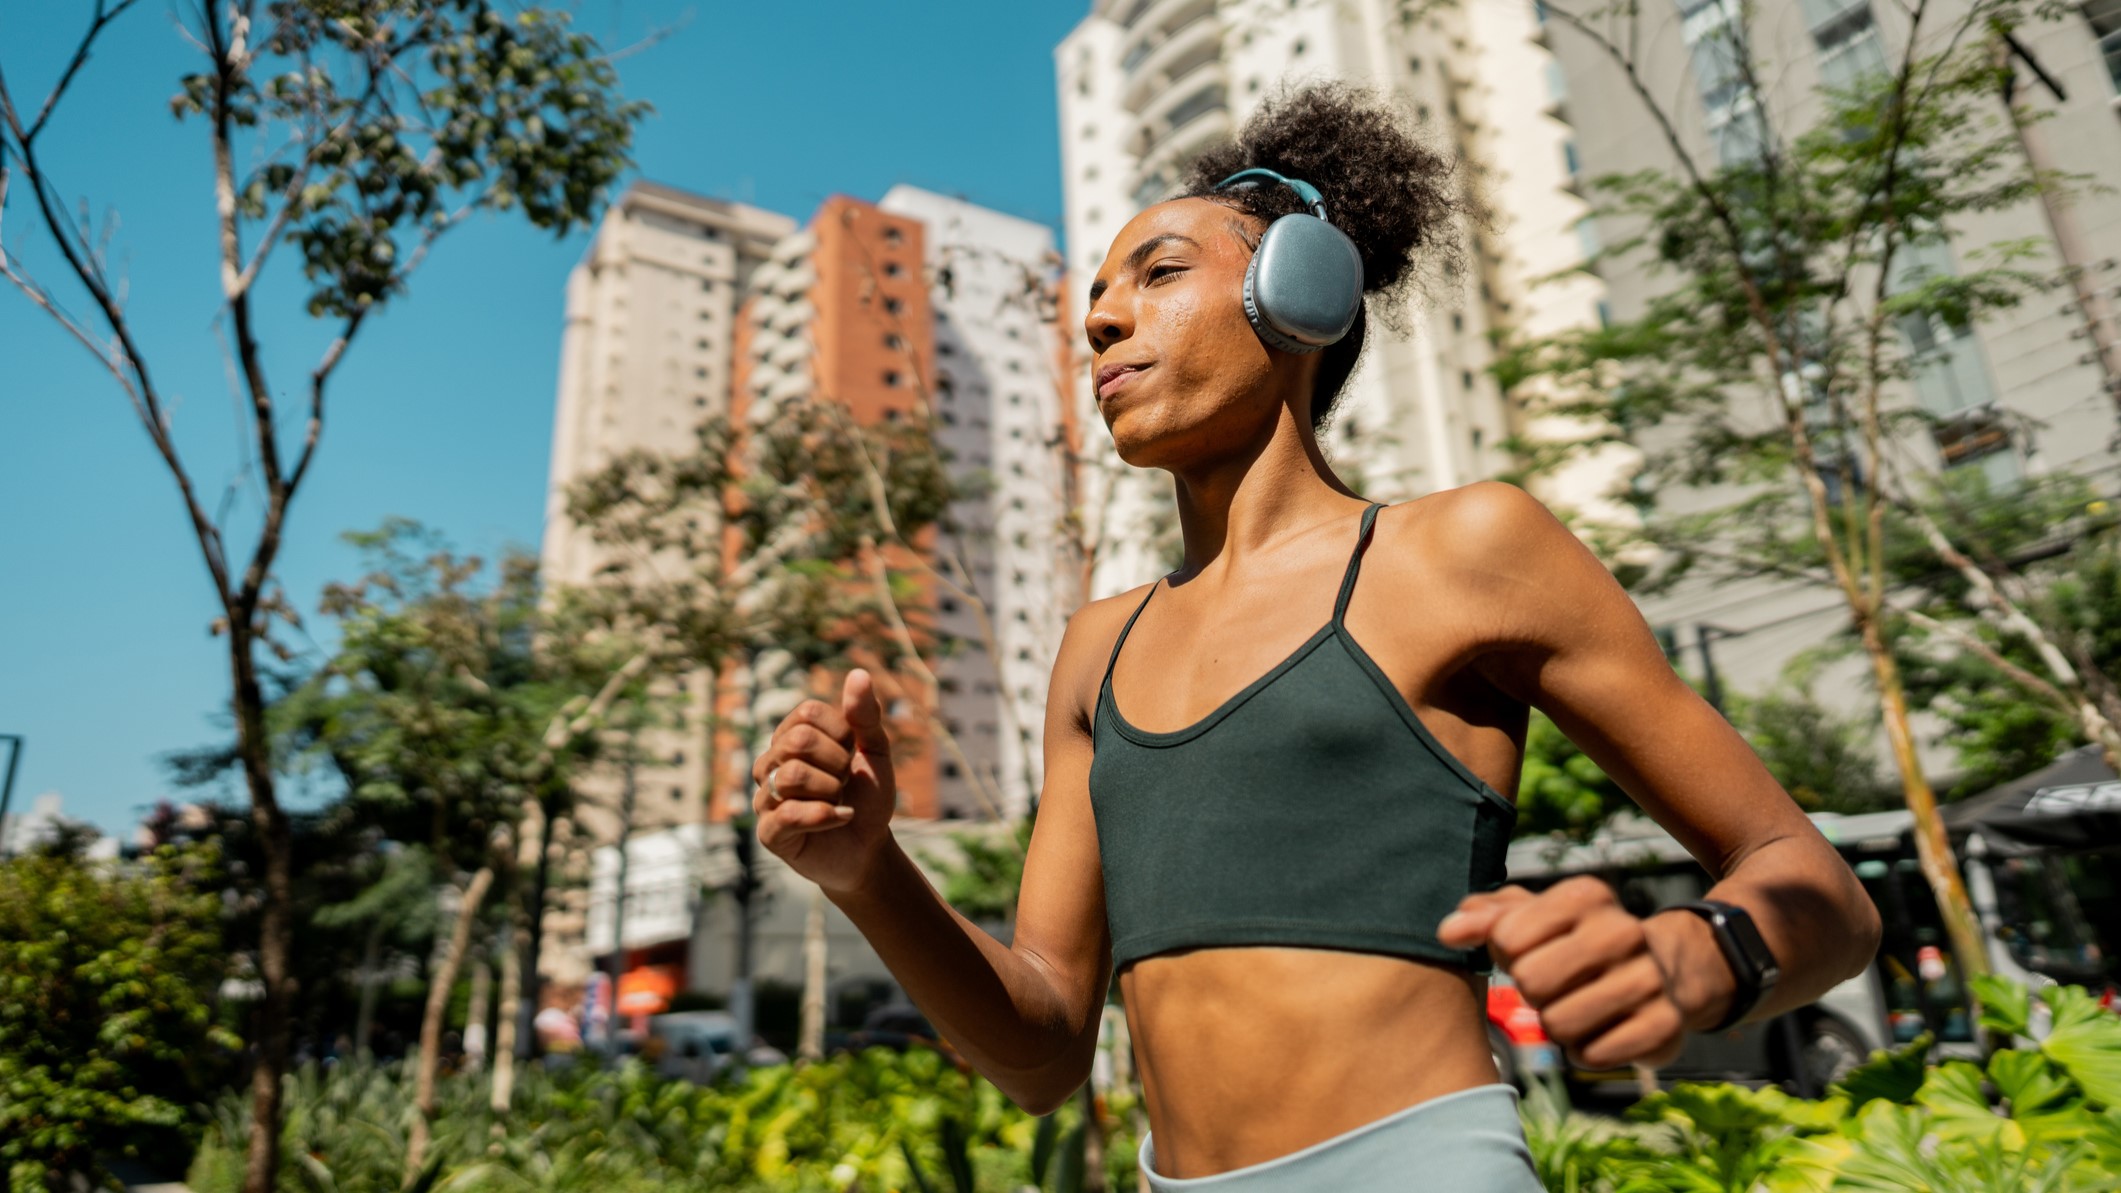 A woman in workout clothes runs in a city wearing wireless headphones.